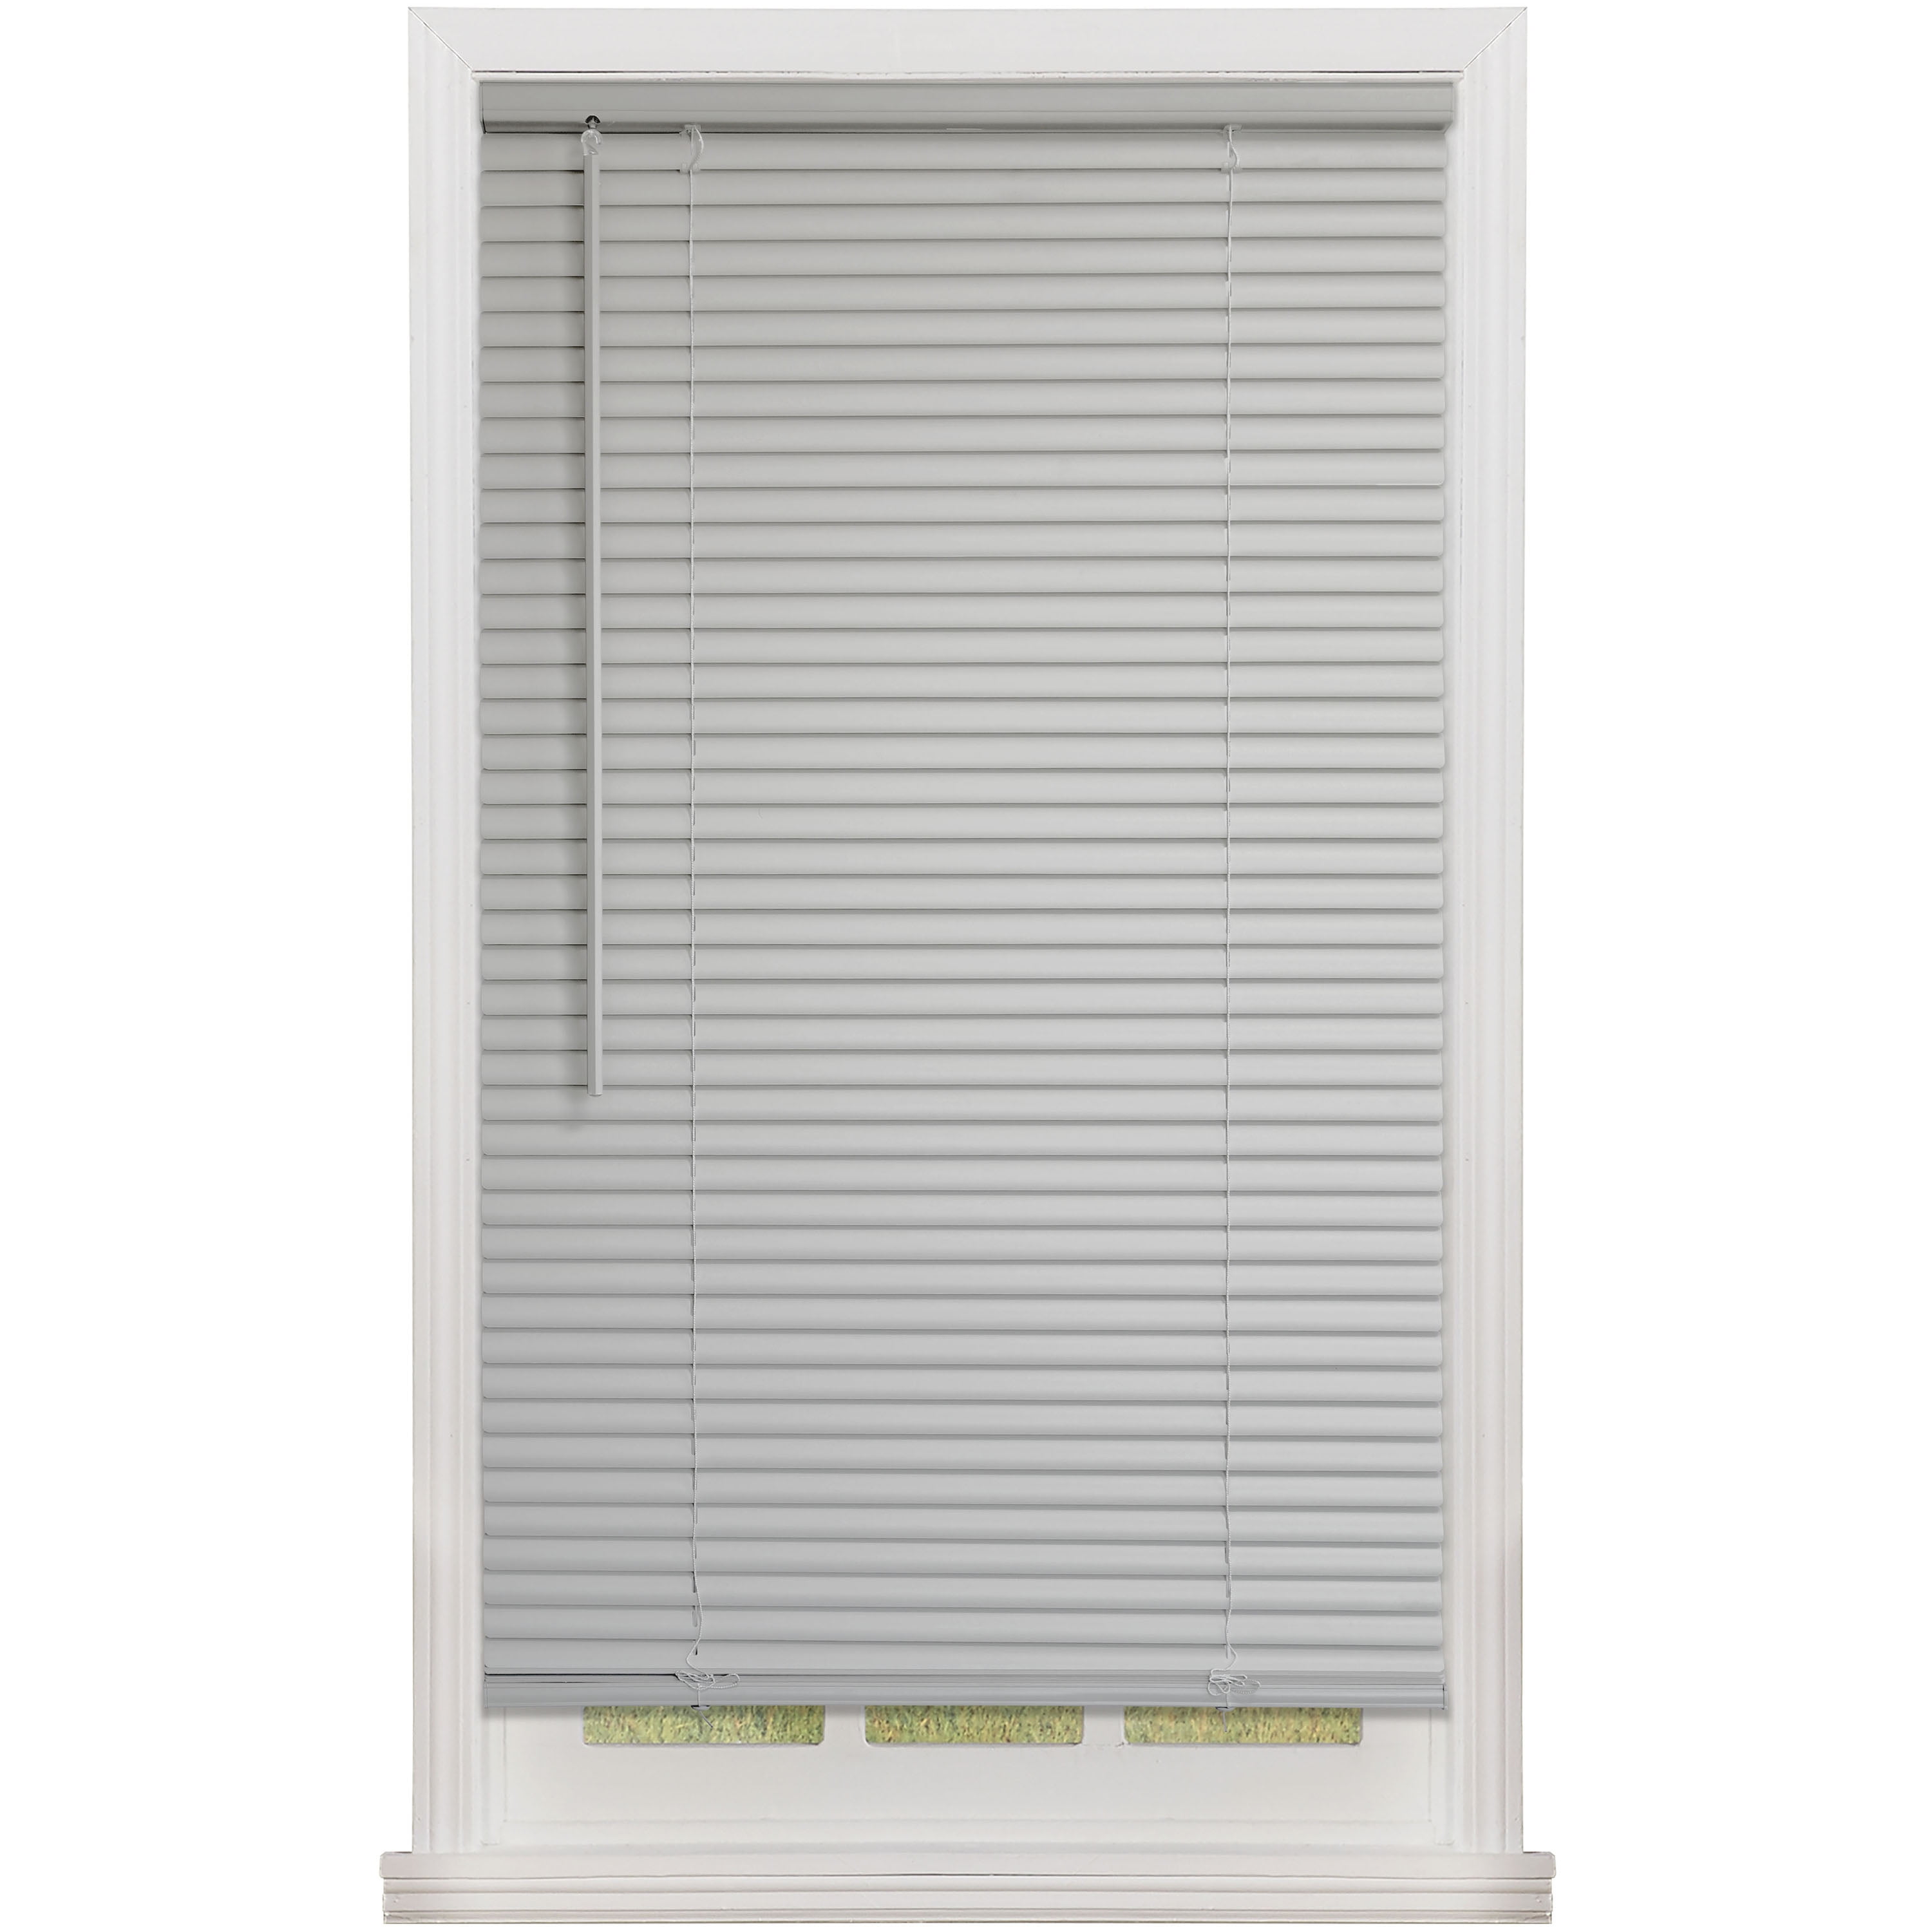 White Cordless Faux Wood Blinds for Windows with 2 in. Slats - 11 in. W x  72 in. L (Actual Size 10.5 in. W x 72 in. L)